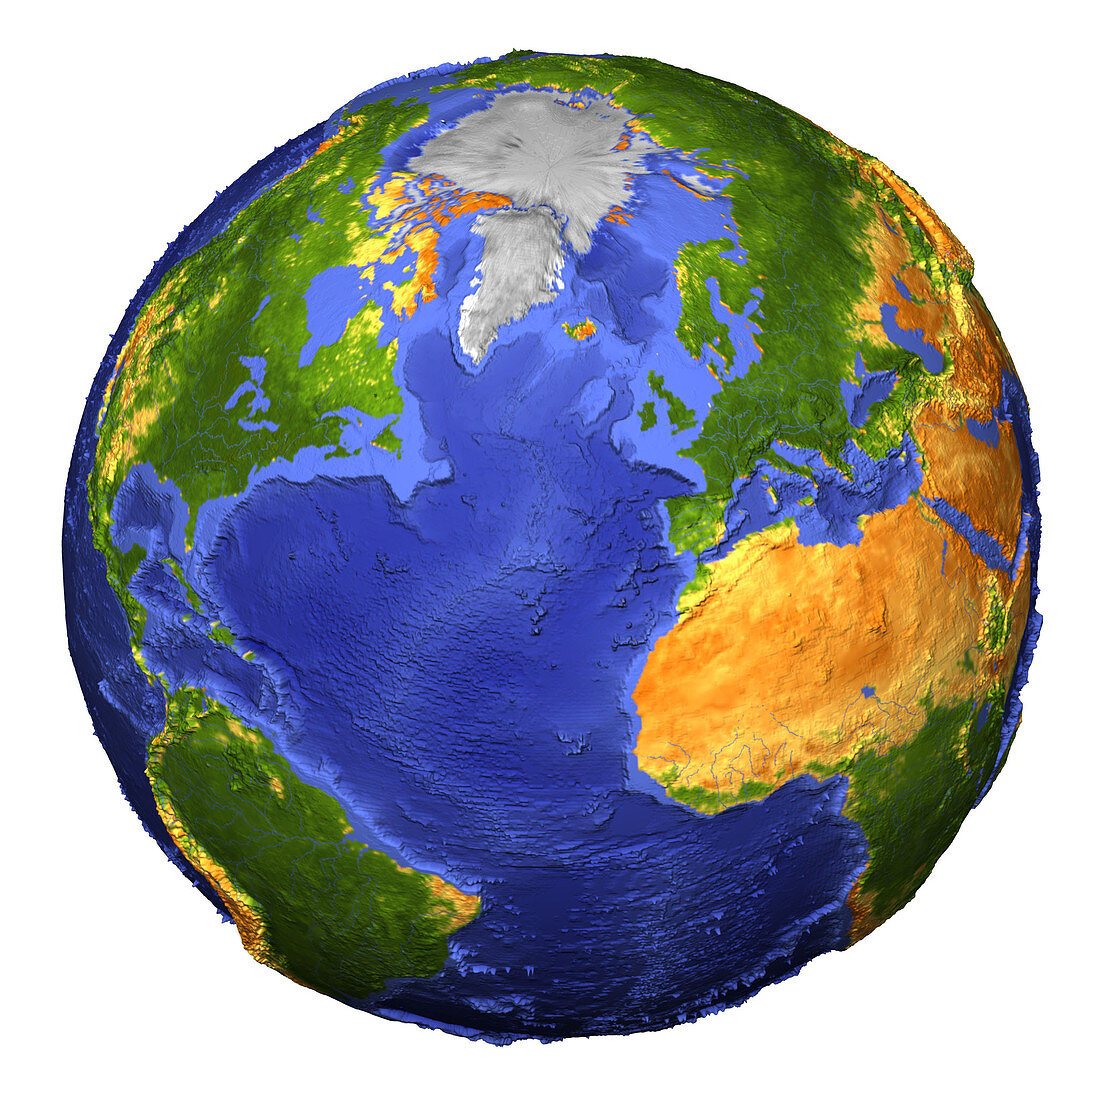 Topographic earth showing vegetation